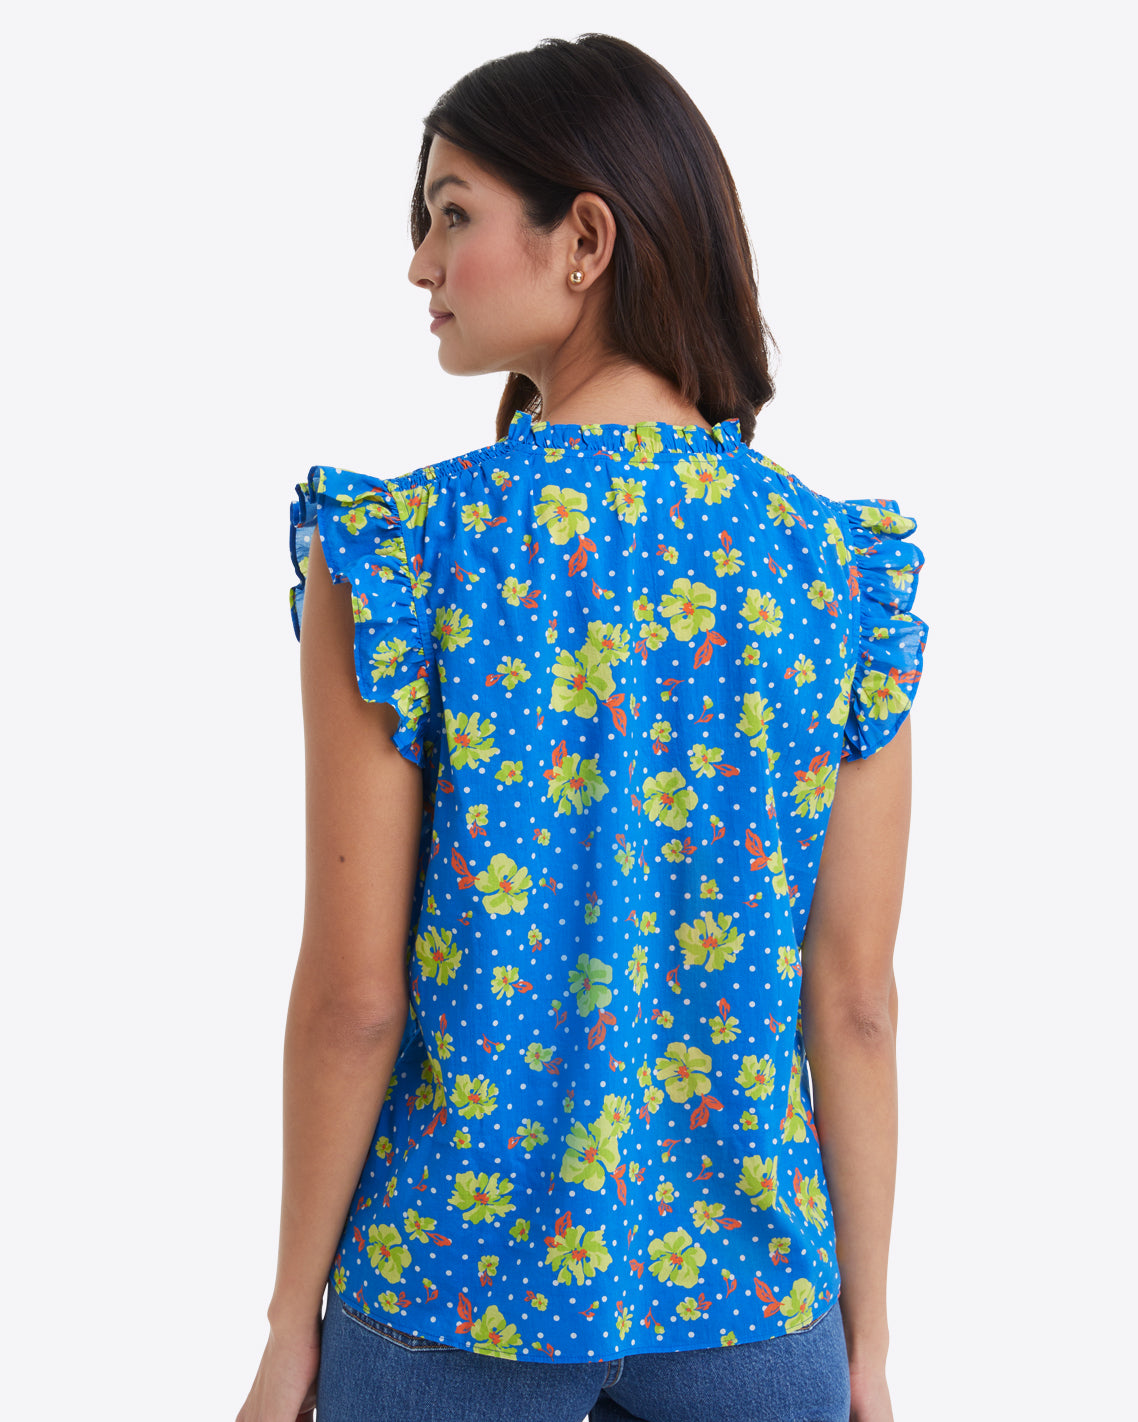 Connie Top in Polka Dot Floral